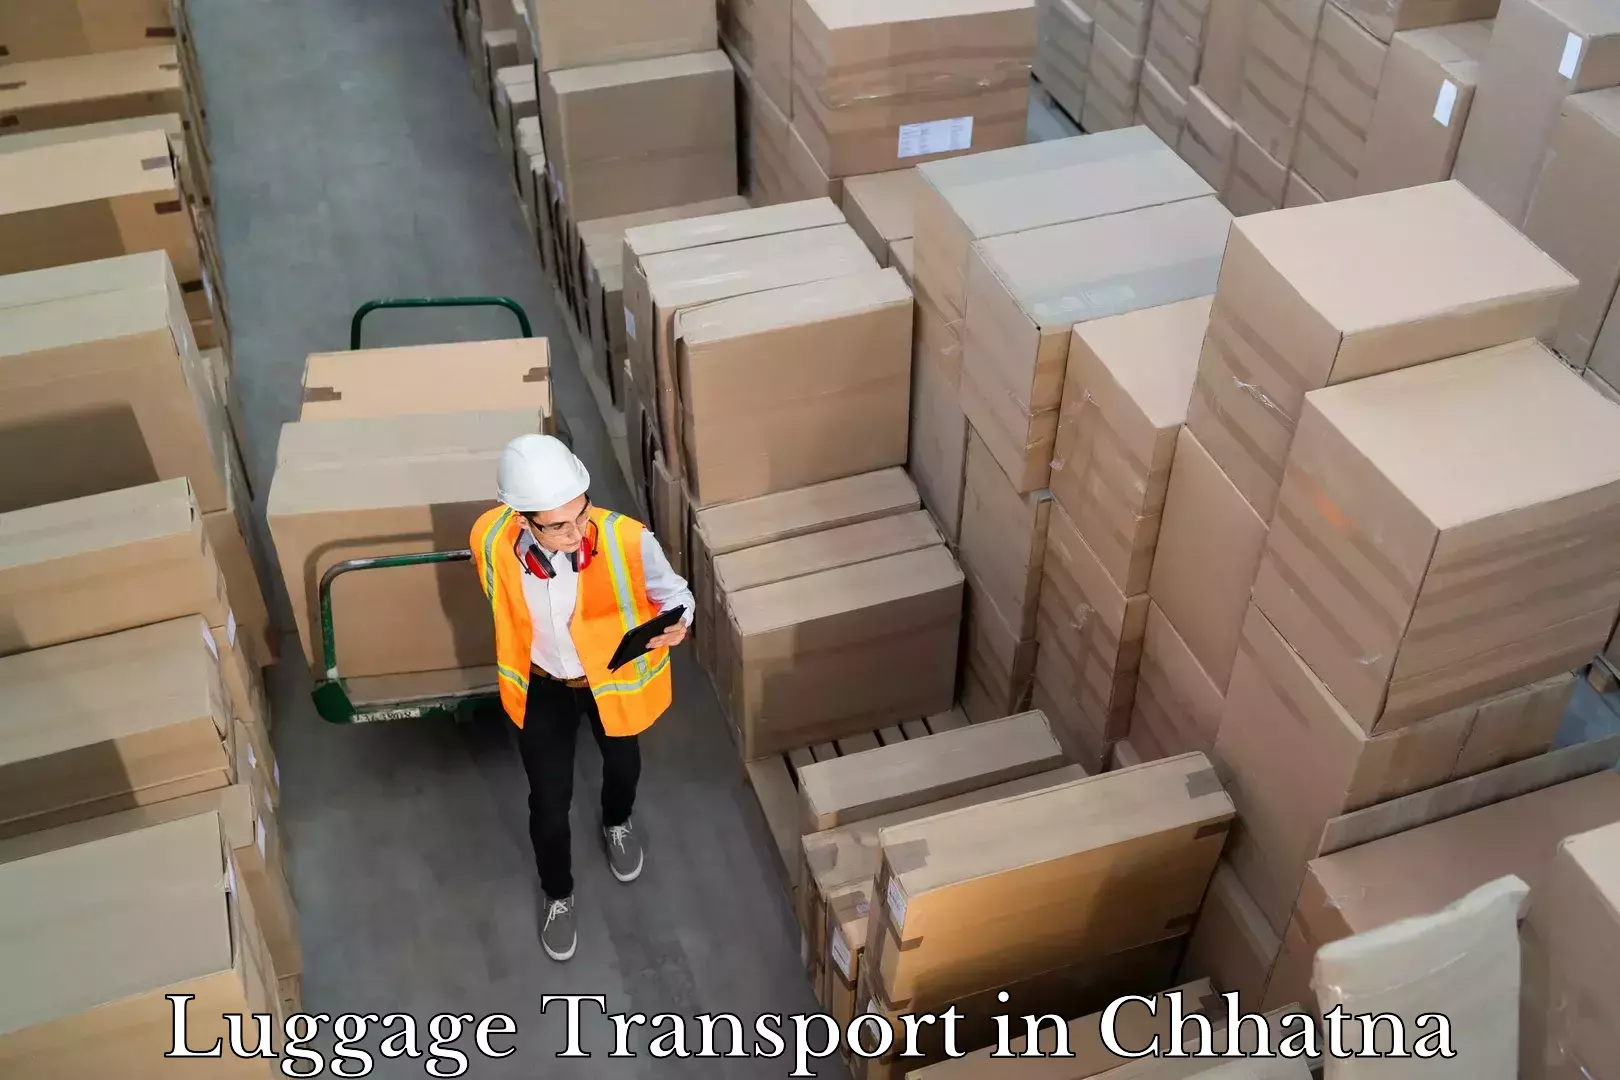 Luggage transport deals in Chhatna